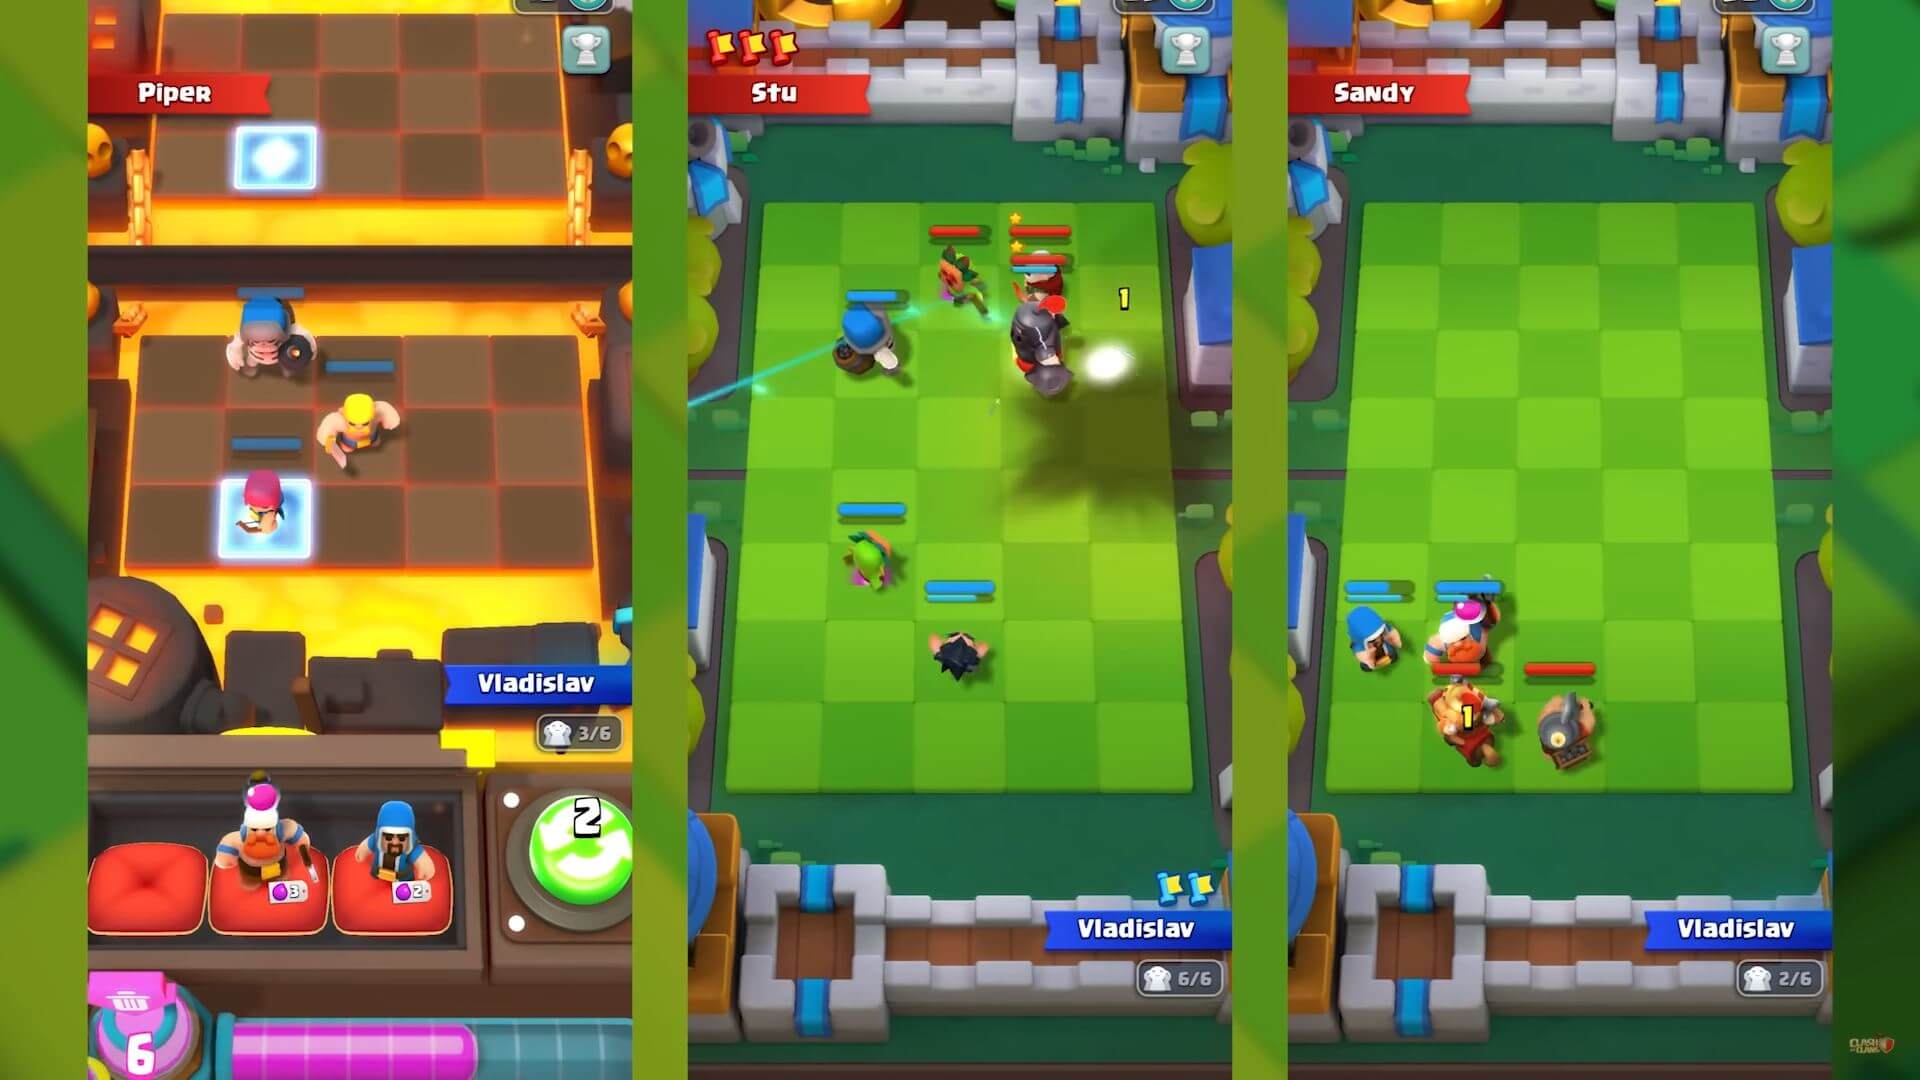 Clash Mini, a game currently being worked on by Supercell